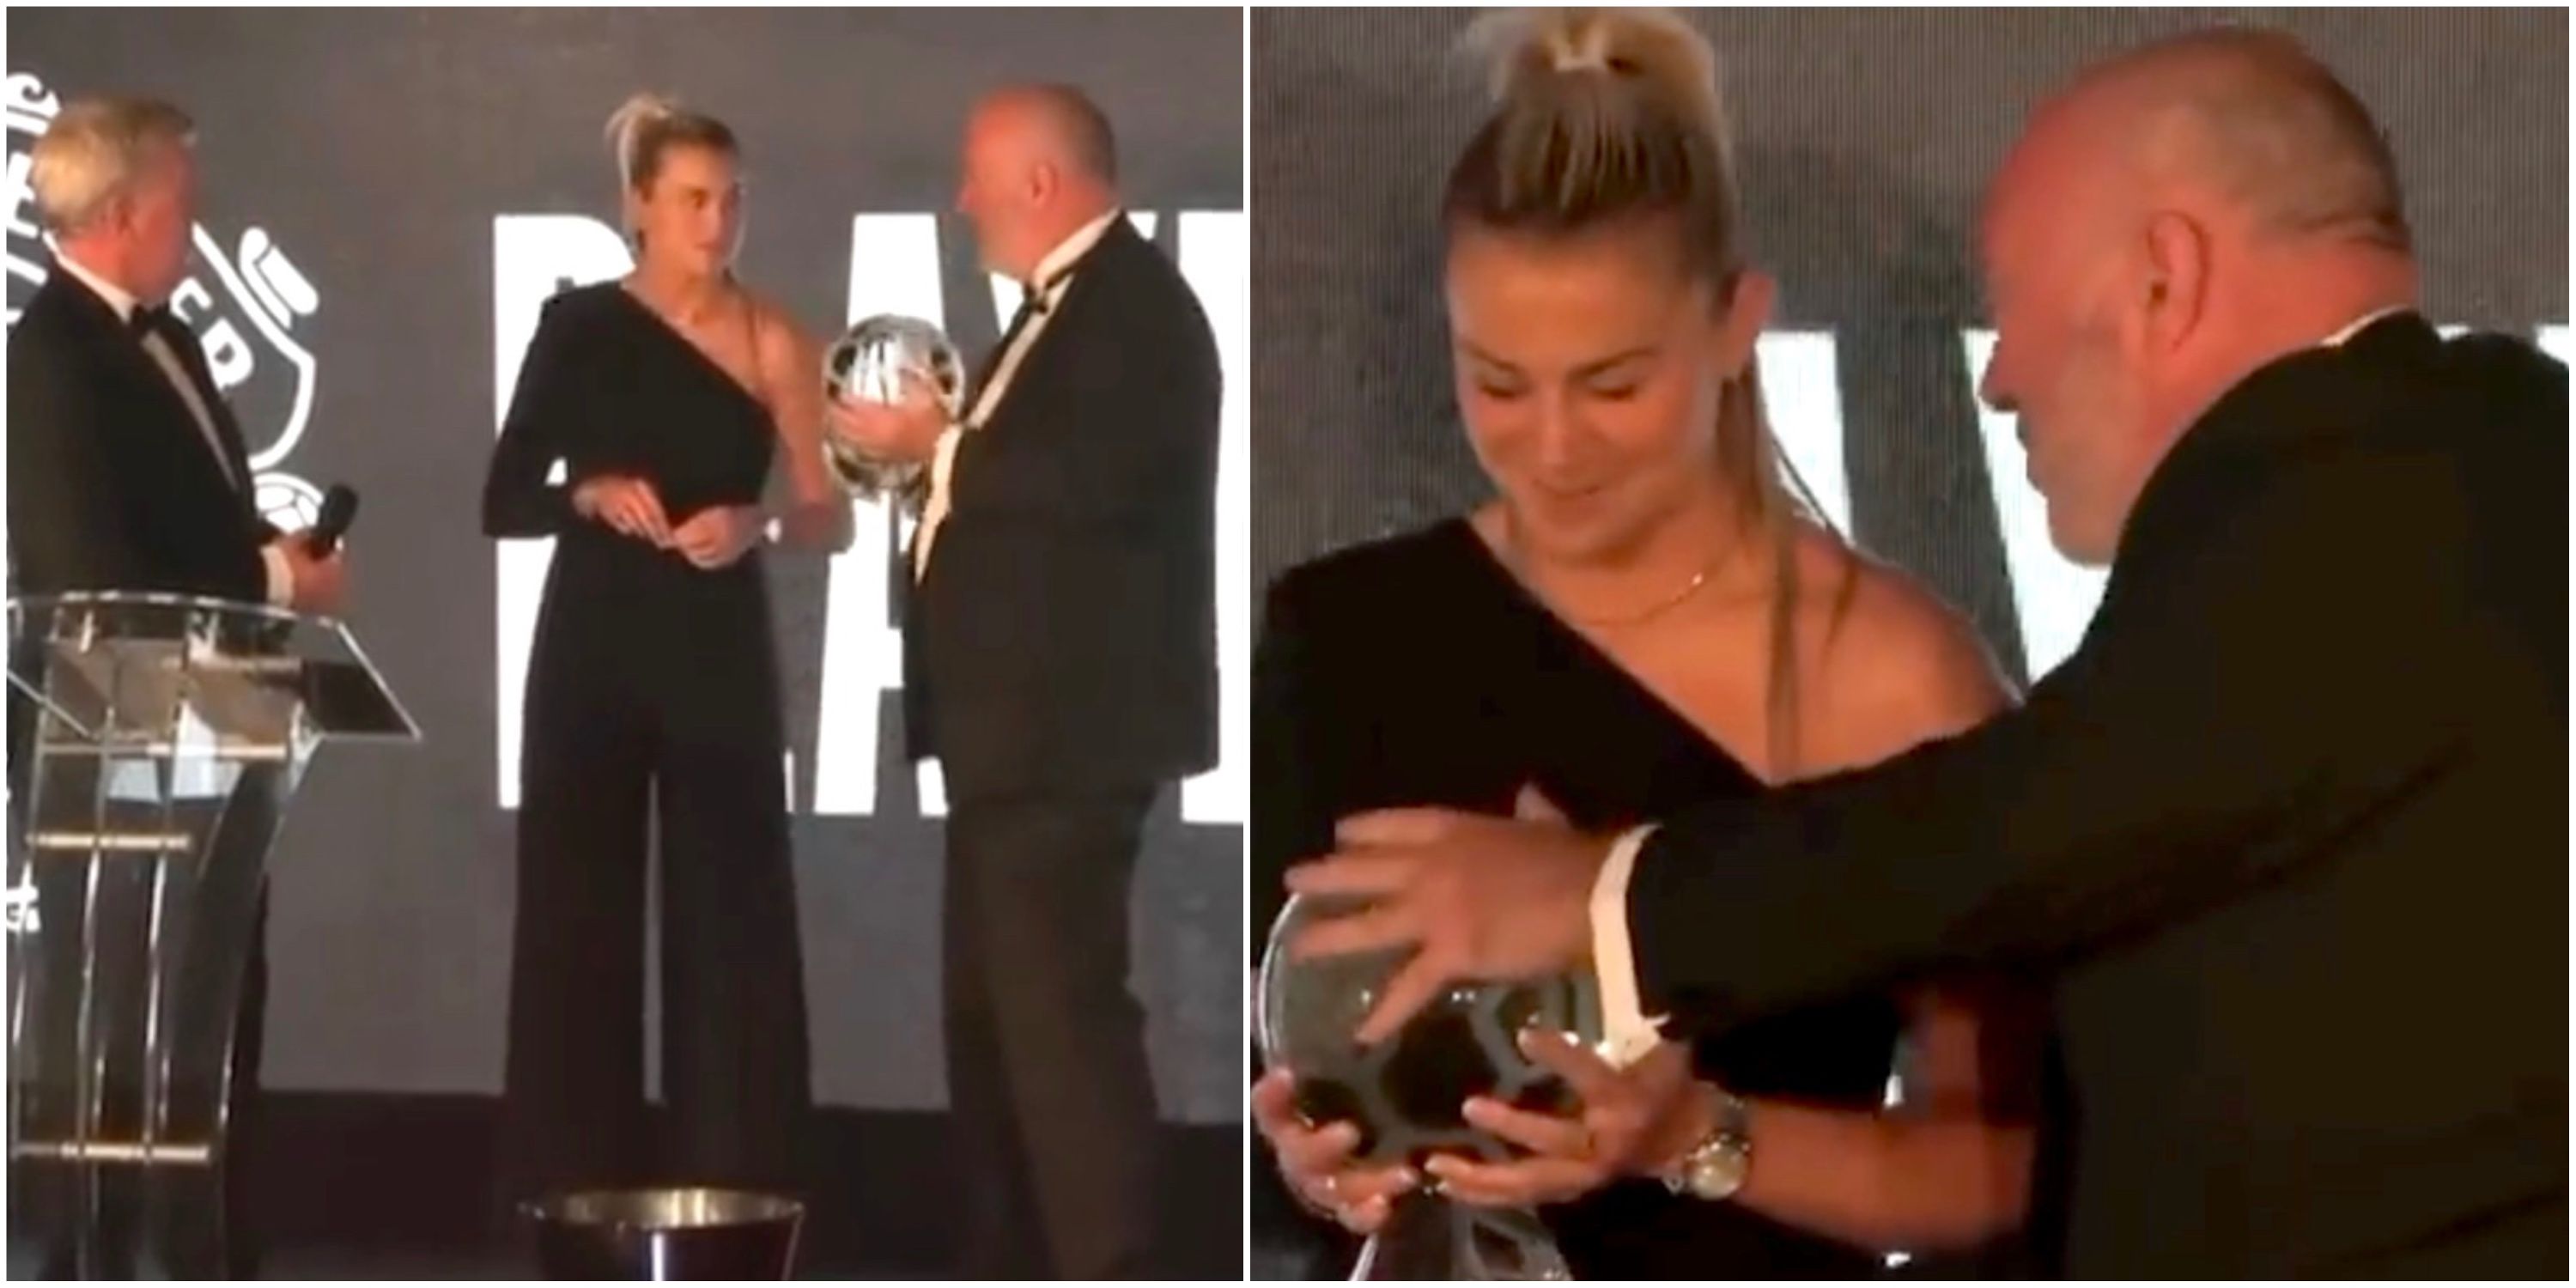 Man Utd: Awkward moment involving Alessia Russo at awards ceremony slammed by fans